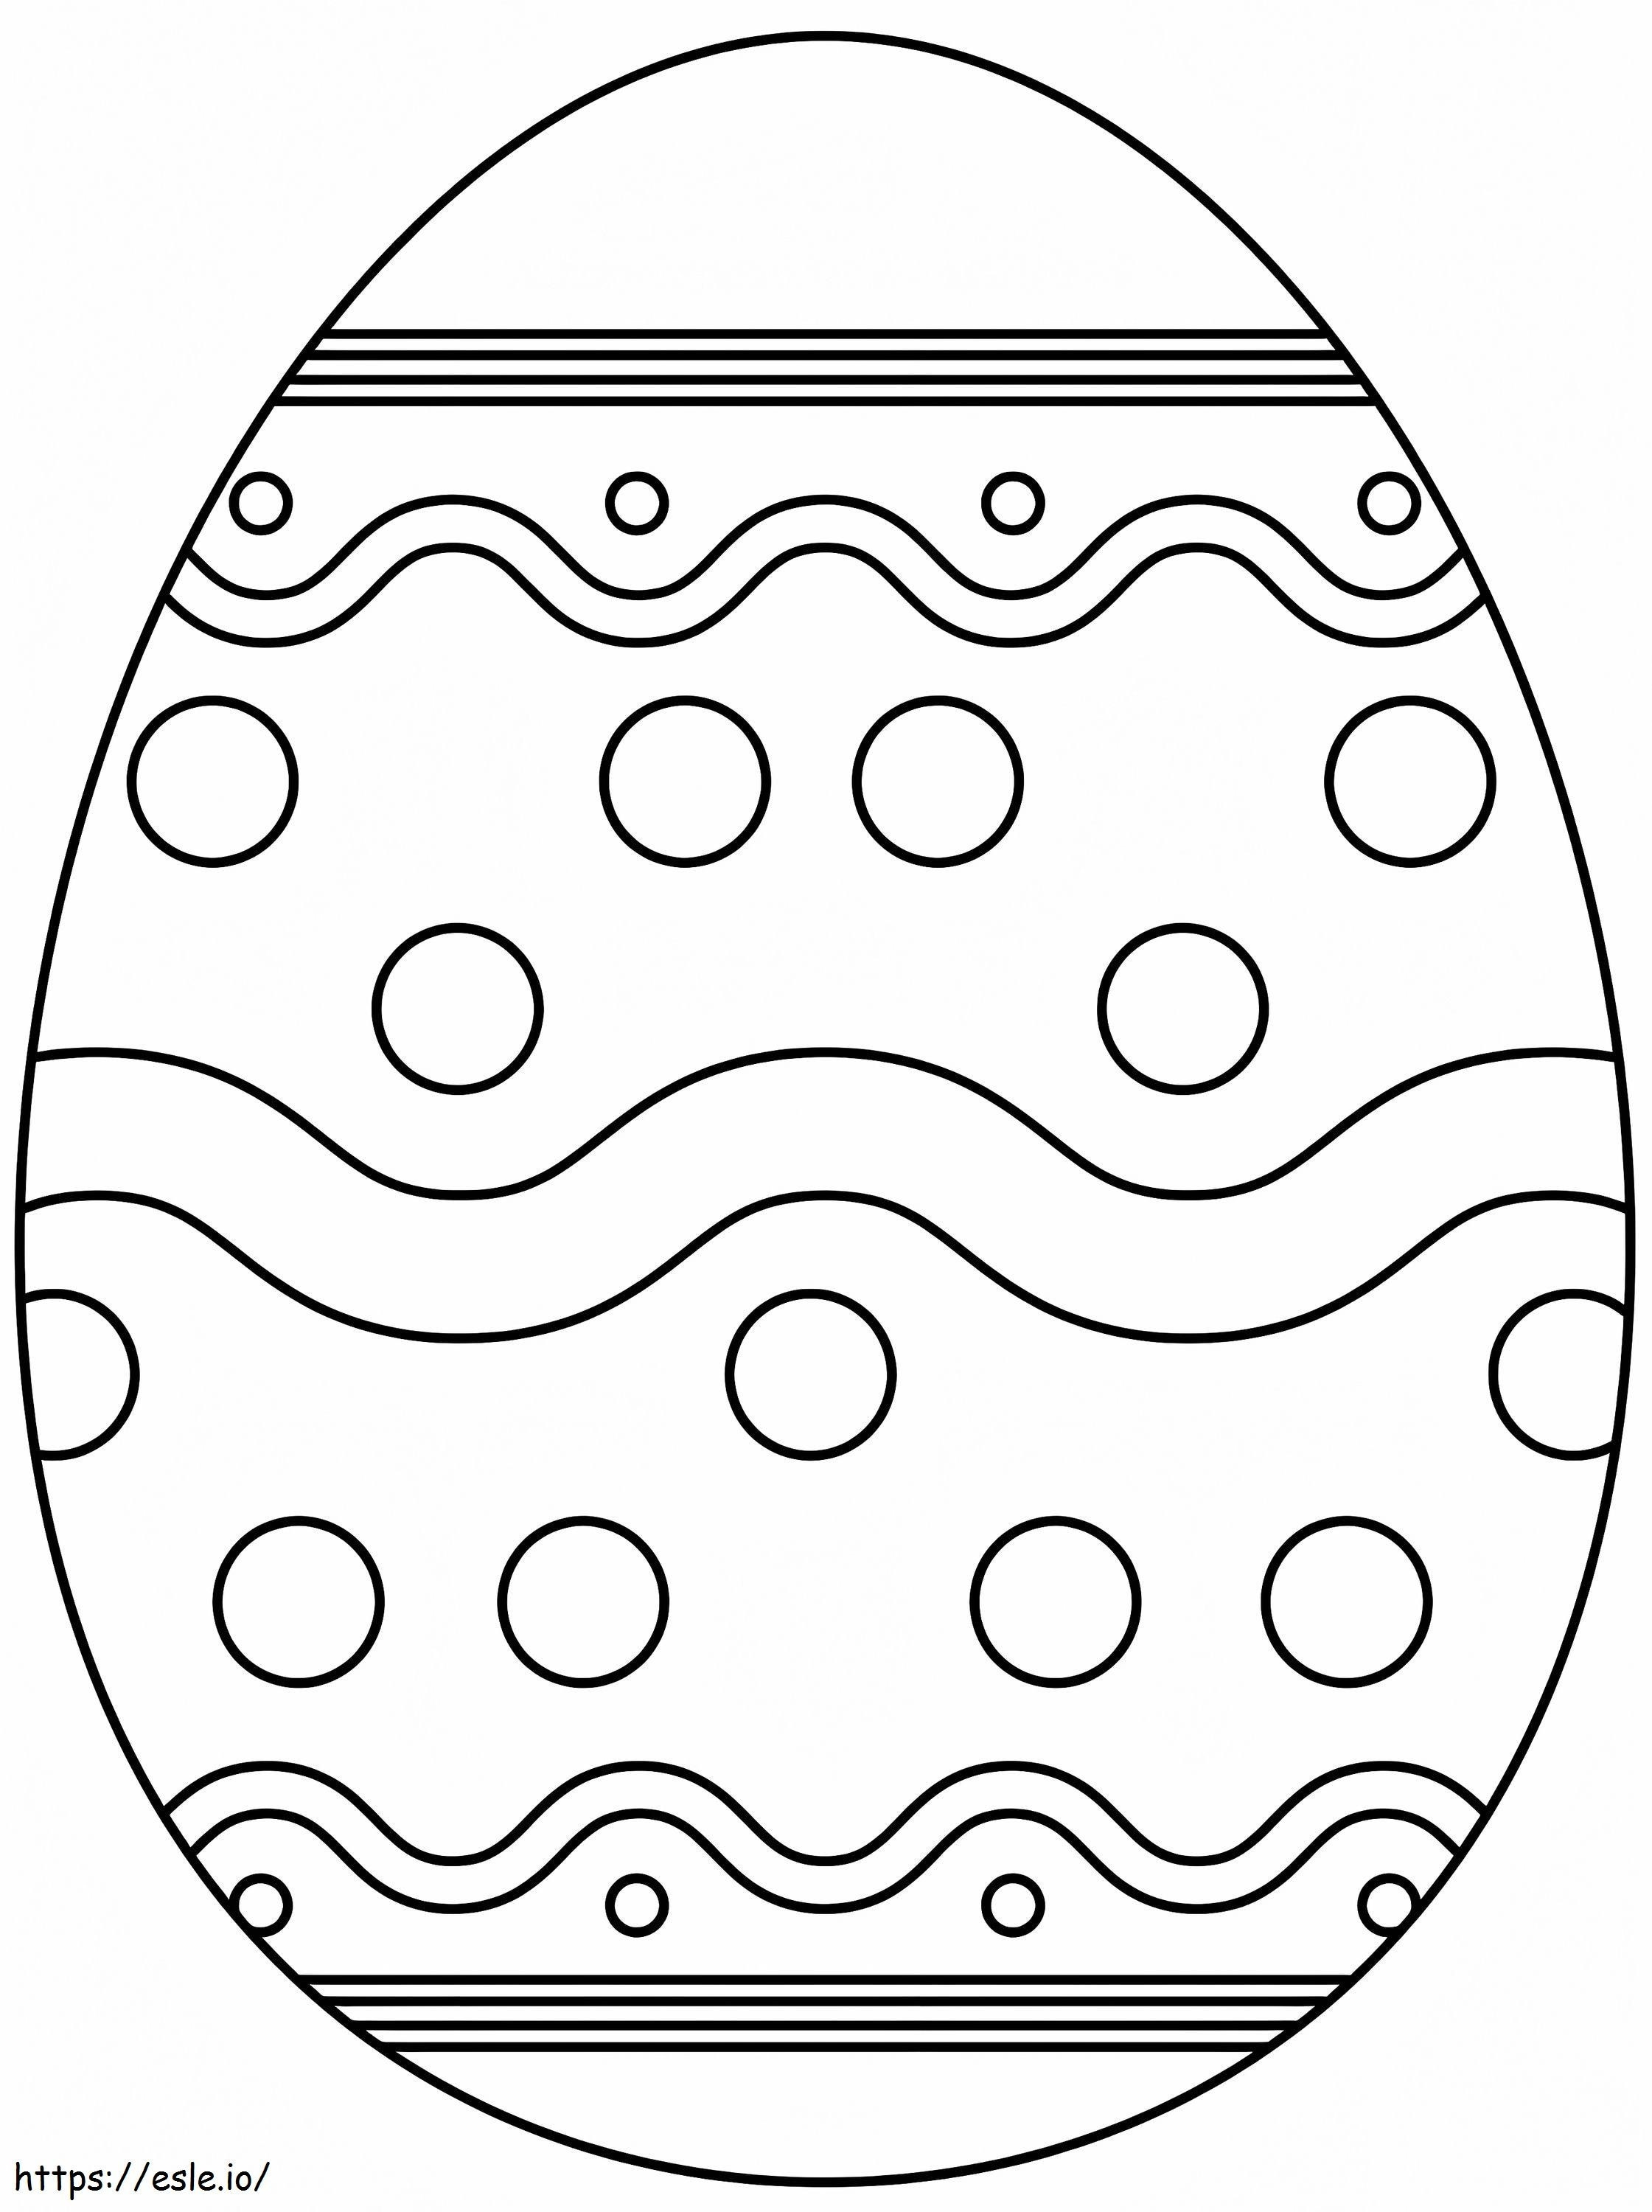 Cute Easter Egg 5 coloring page